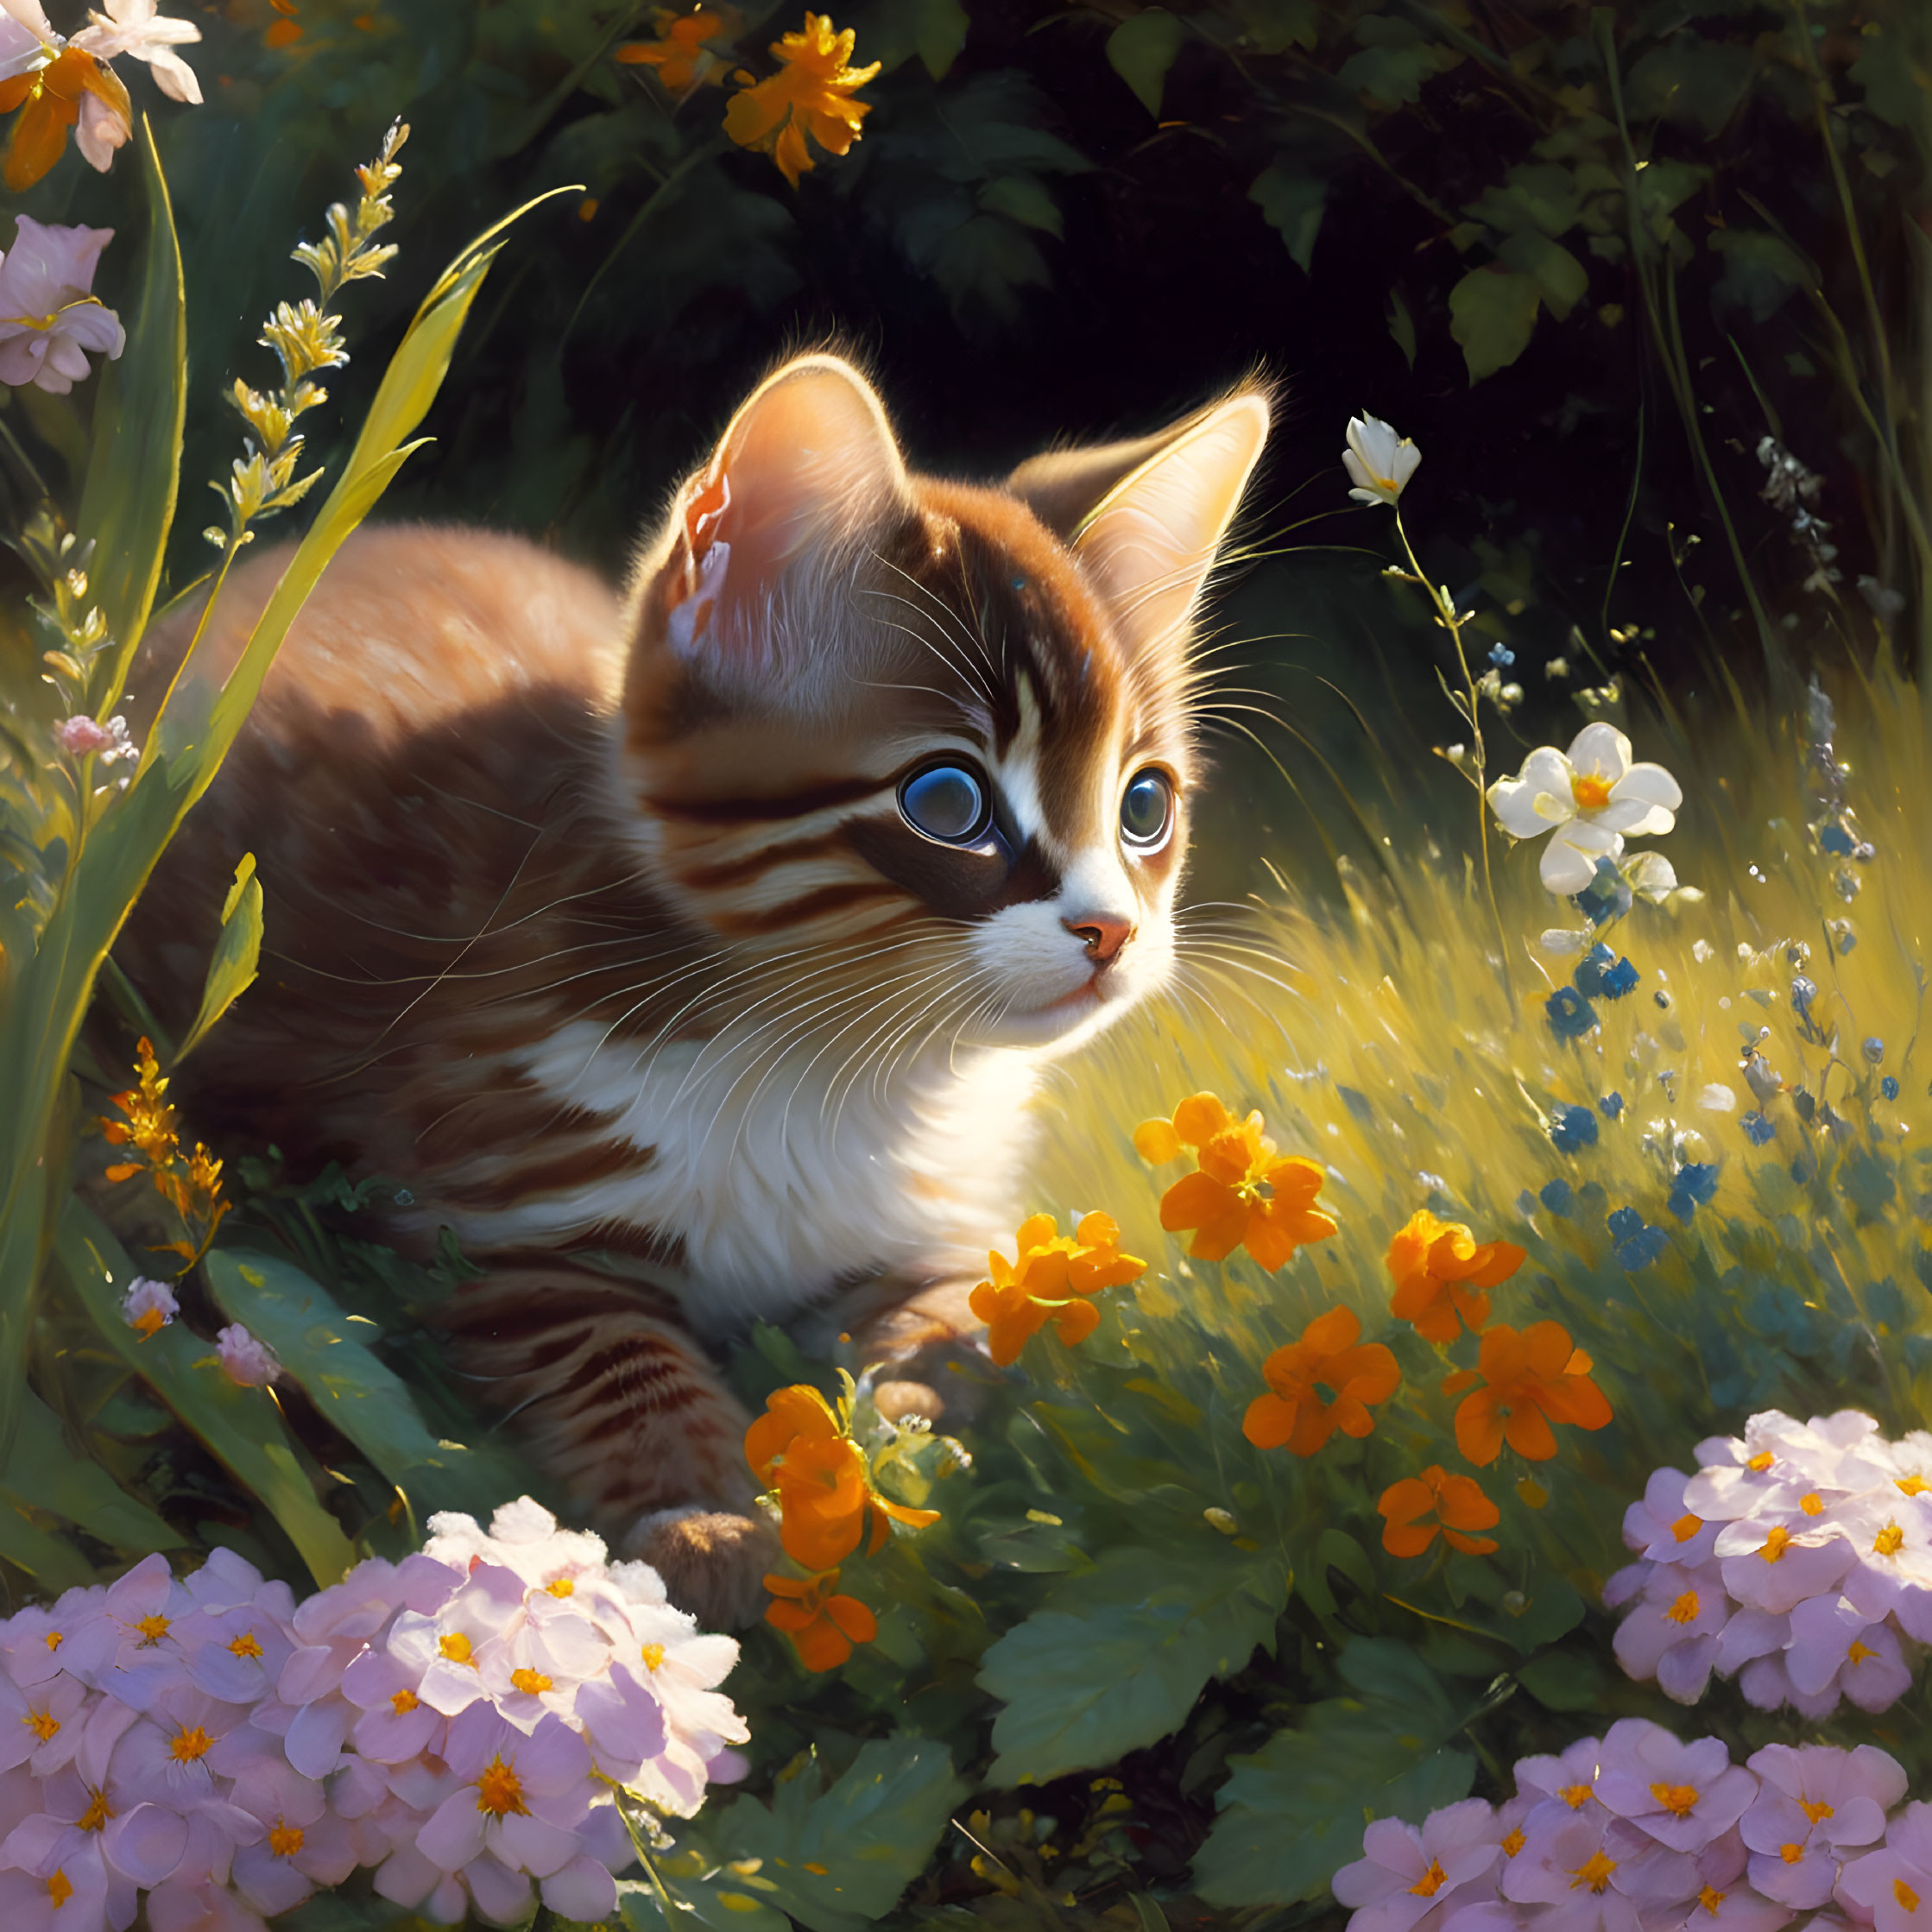 Brown and White Kitten with Blue Eyes in Sunlit Garden Among Flowers